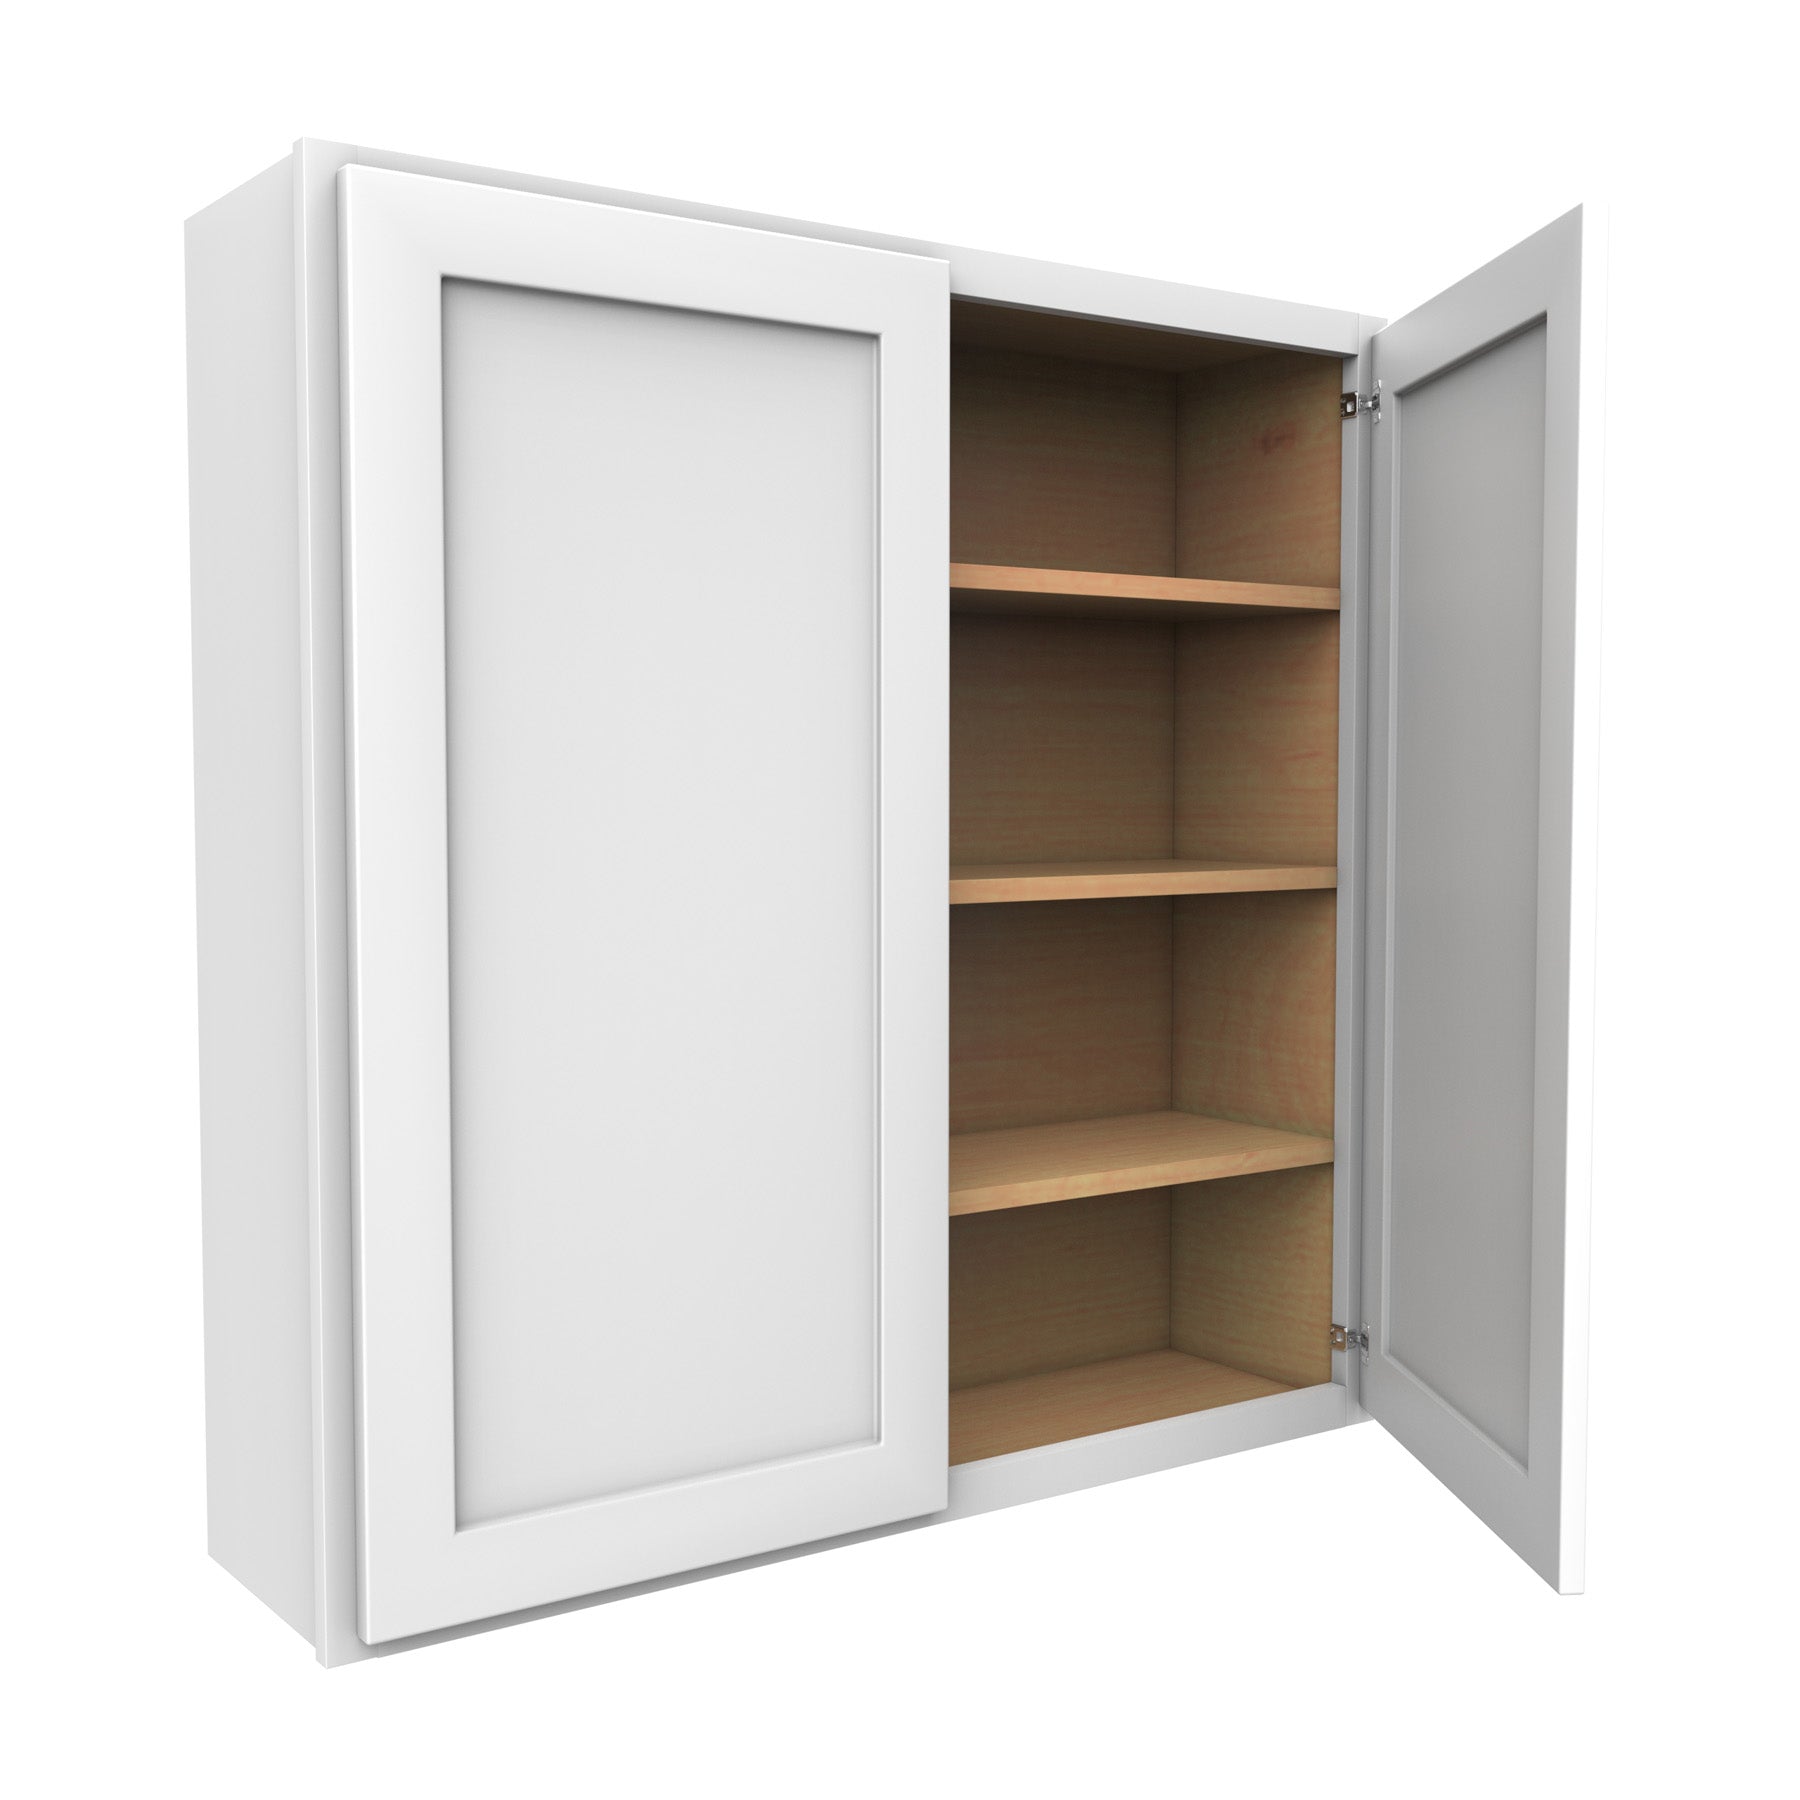 Luxor White - Double Door Wall Cabinet | 42"W x 42"H x 12"D